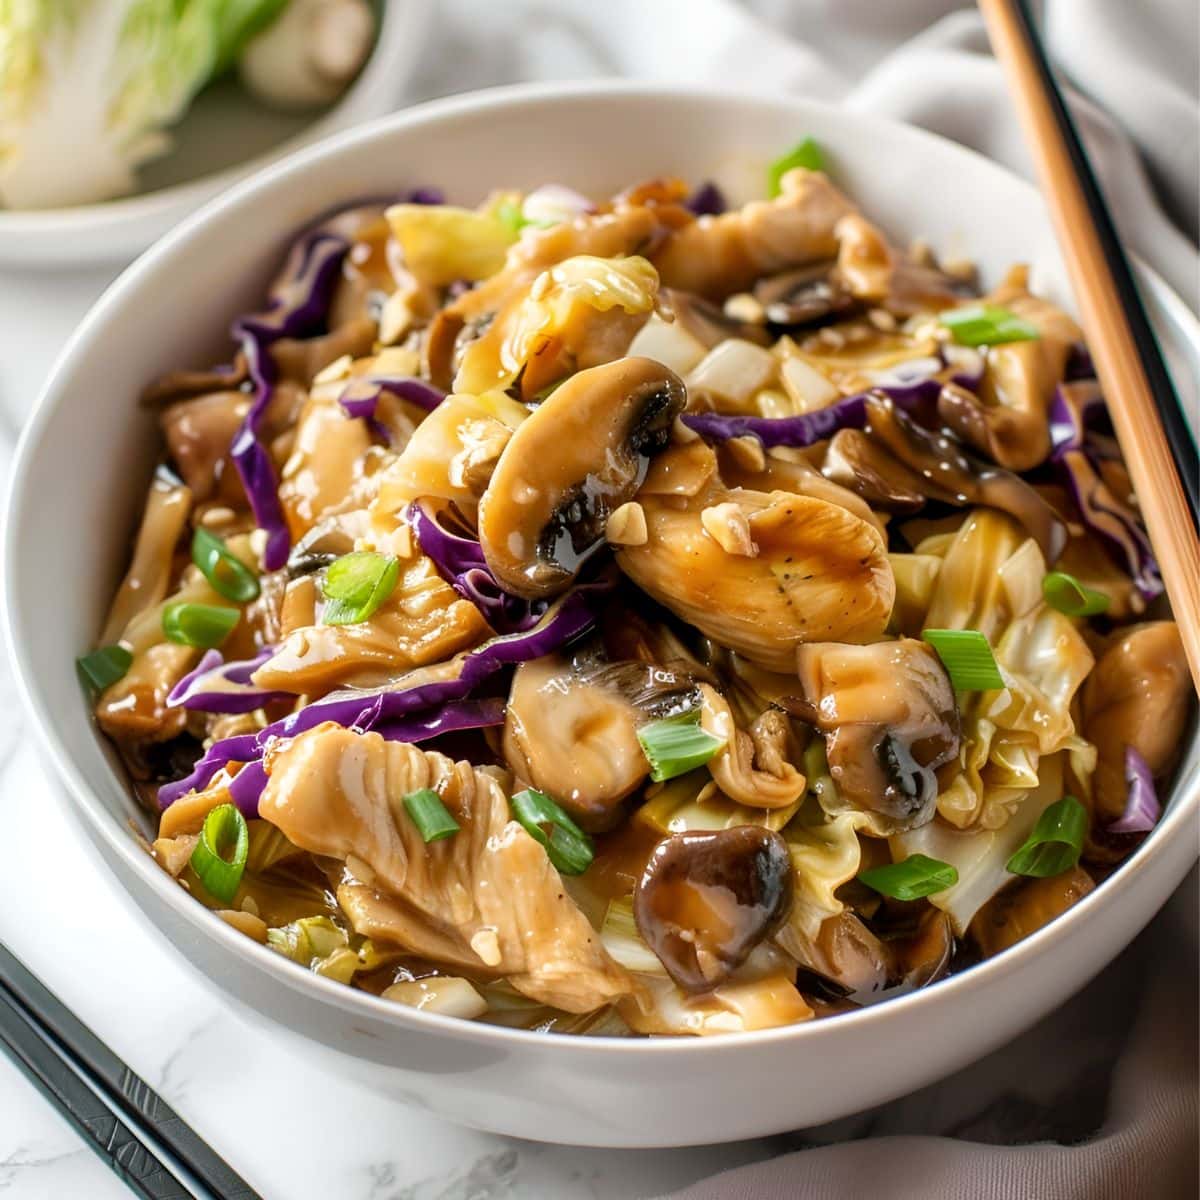 Moo Shu Chicken with Mushrooms, Onions, Cabbage, Garlic, Green Onions, in Sauce in a White Bowl with Chopsticks